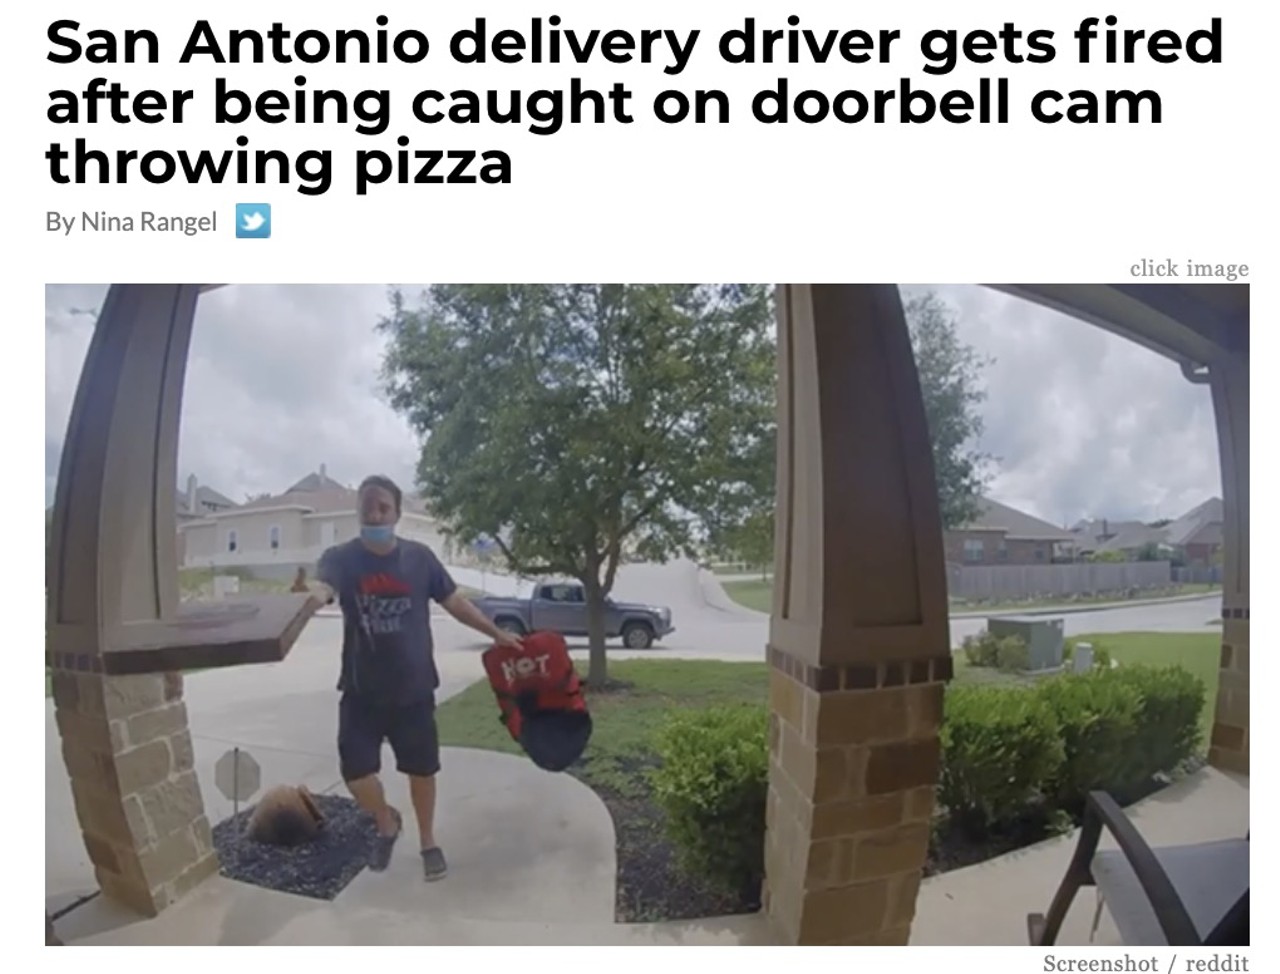 San Antonio delivery driver gets fired after being caught on doorbell cam throwing pizza